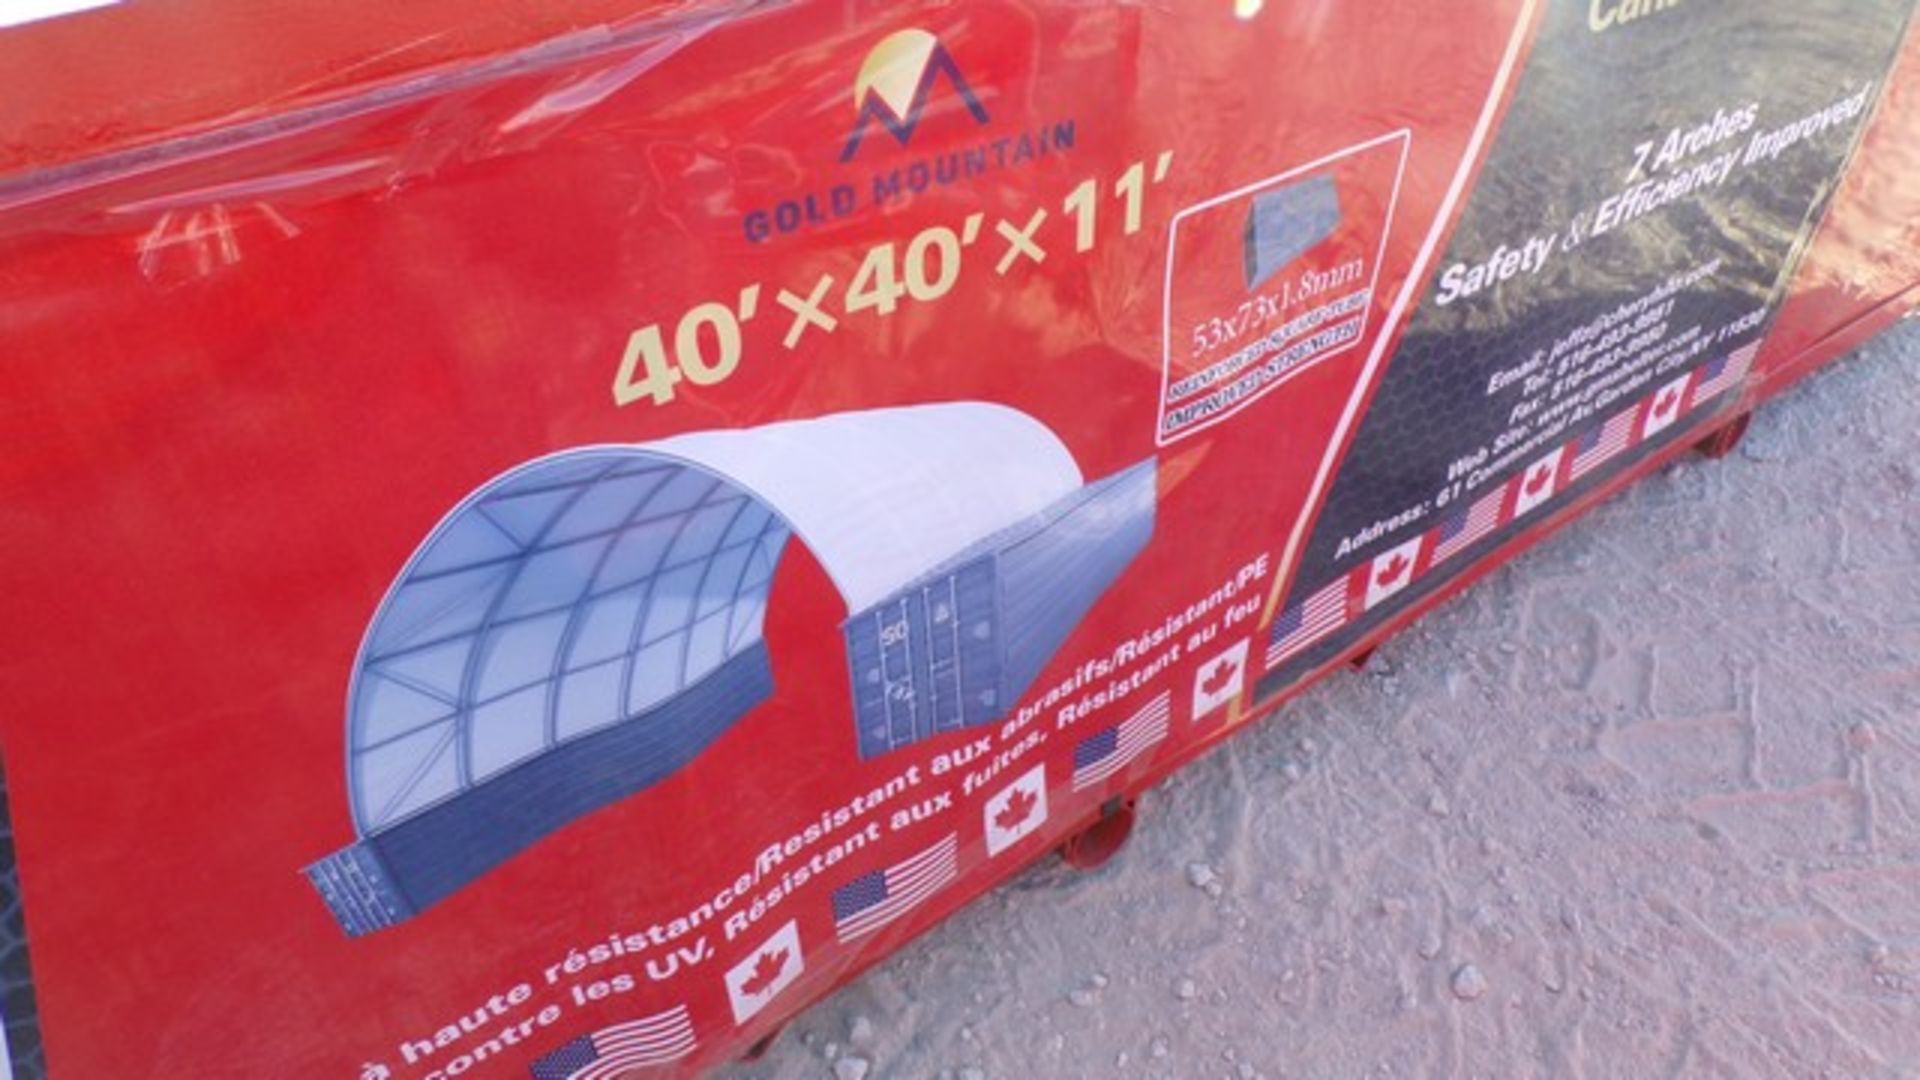 Located in YARD 1 - Midland, TX UNUSED 40' X 40' X 11' DOME CONTAINER STORAGE SHELTER - Image 2 of 2